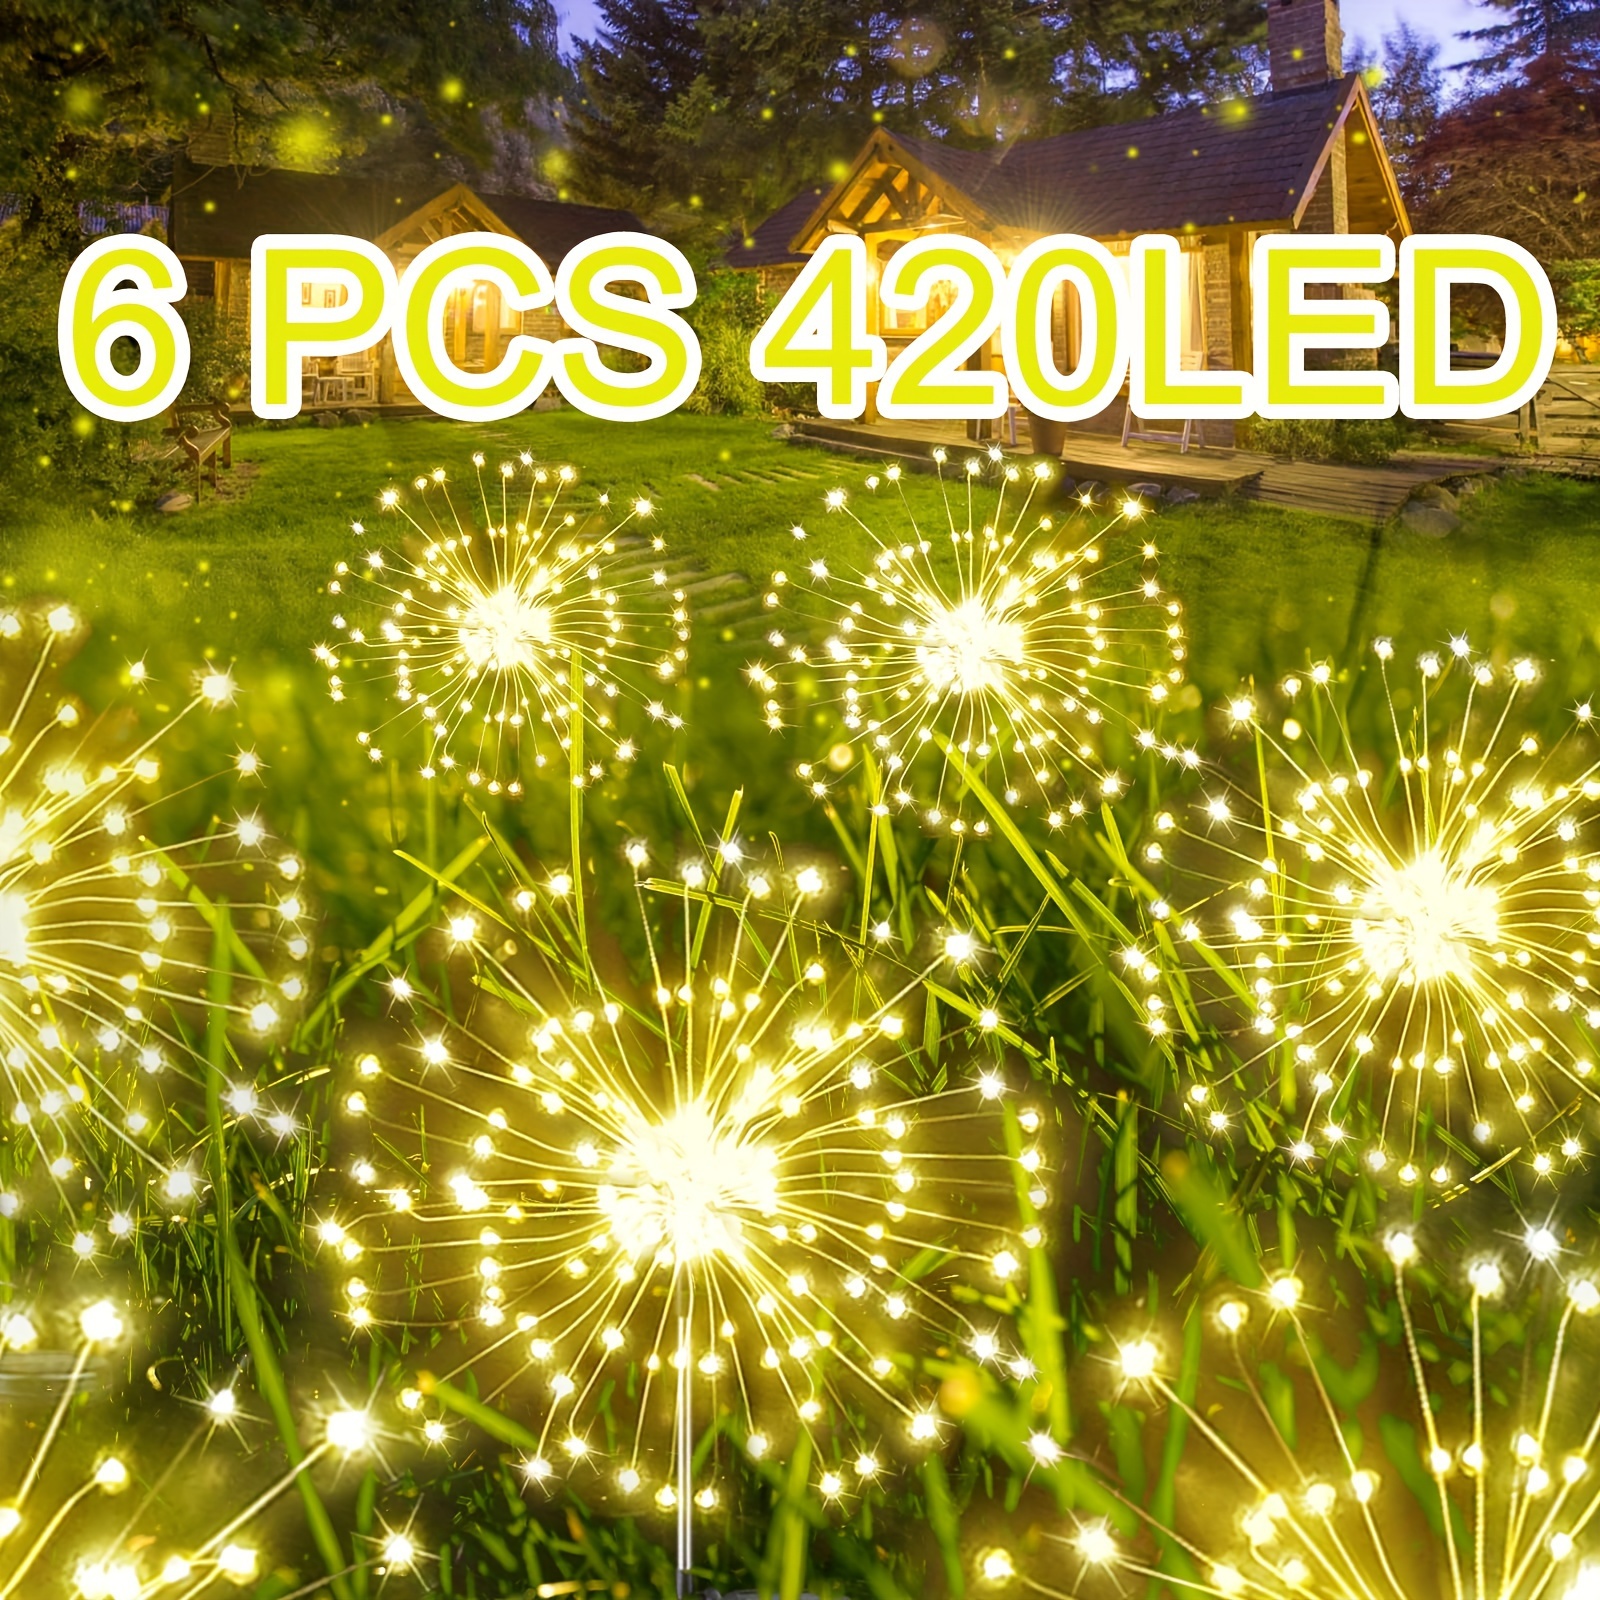 

6-pack Outdoor, Solar Firework Lights Upgraded 425 Led Solar Powered Sparkler Lights For Outside With 8 Lighting Modes For Garden, Patio, Yard, Outdoor Decor (warm White, Multicolor)